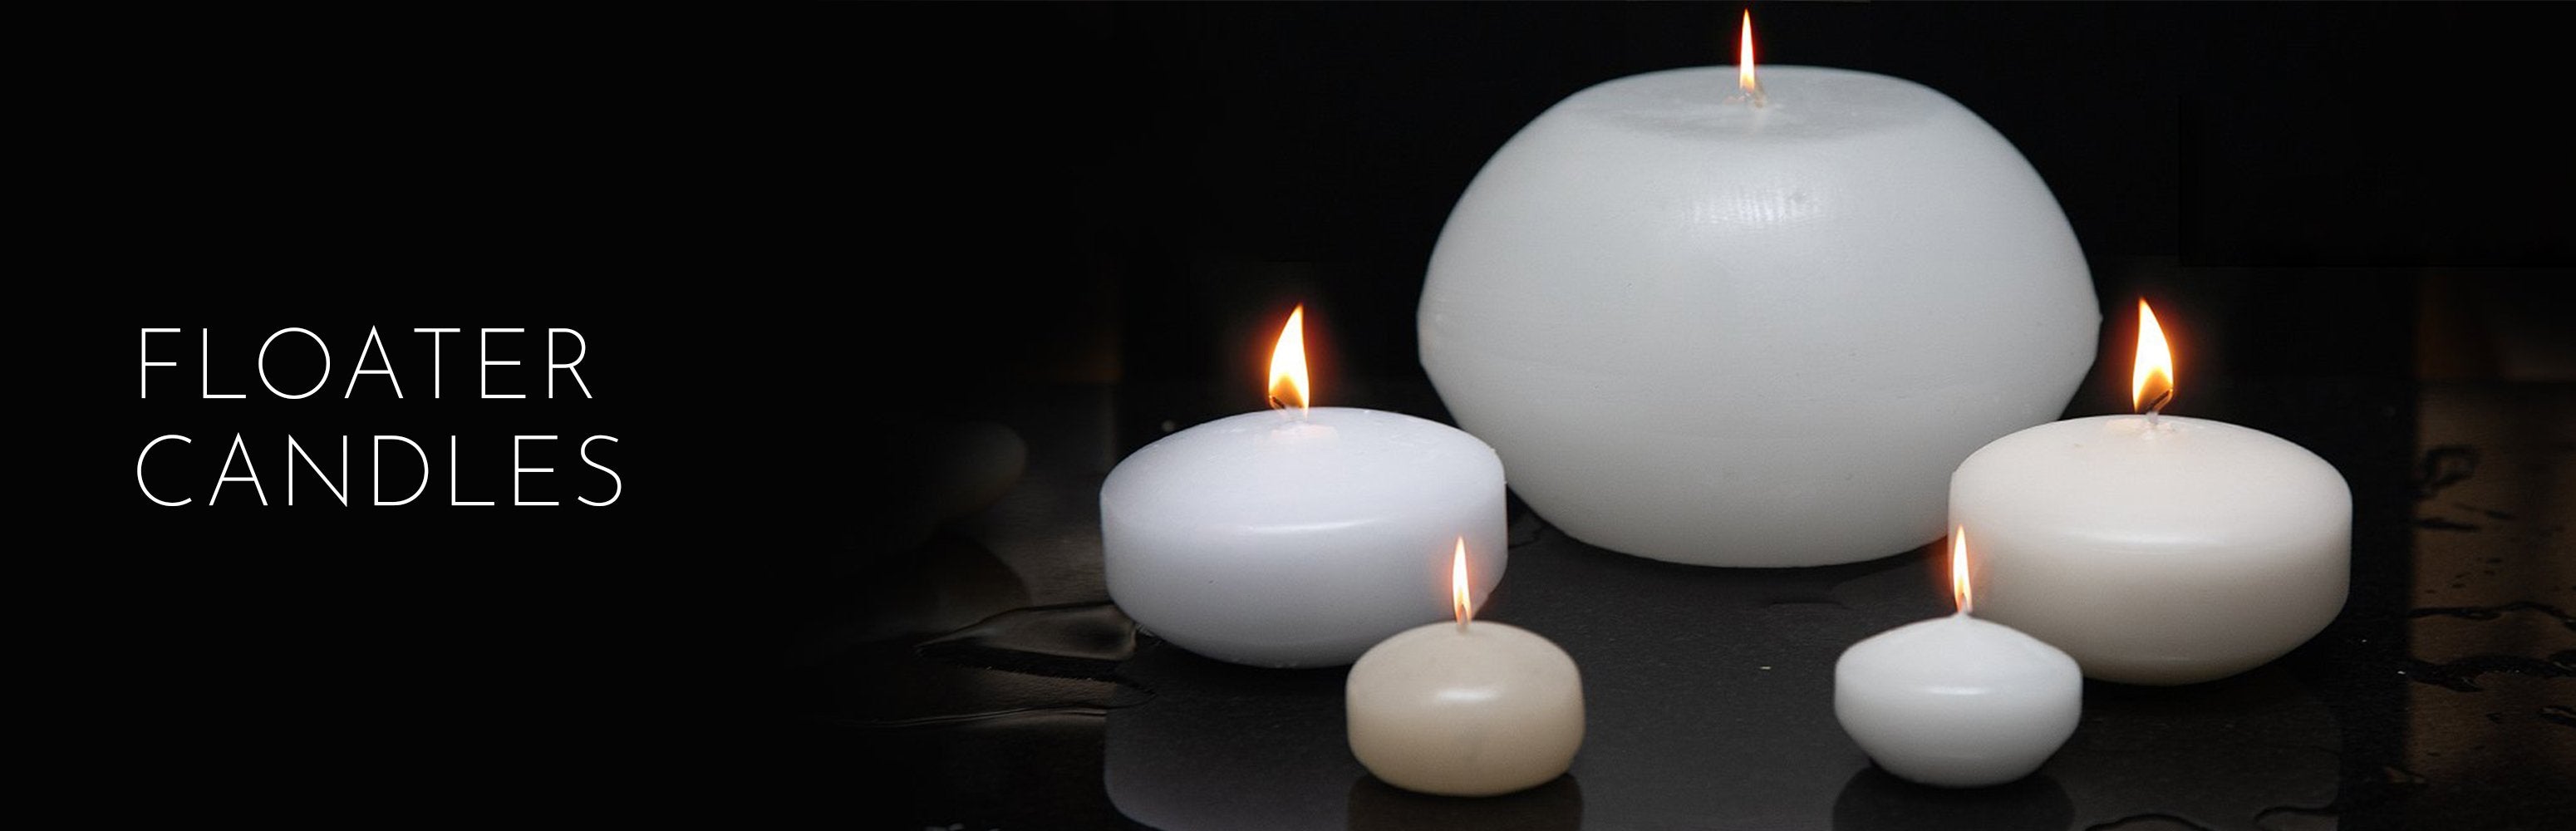 Stone Candles Floaters Collection Banner